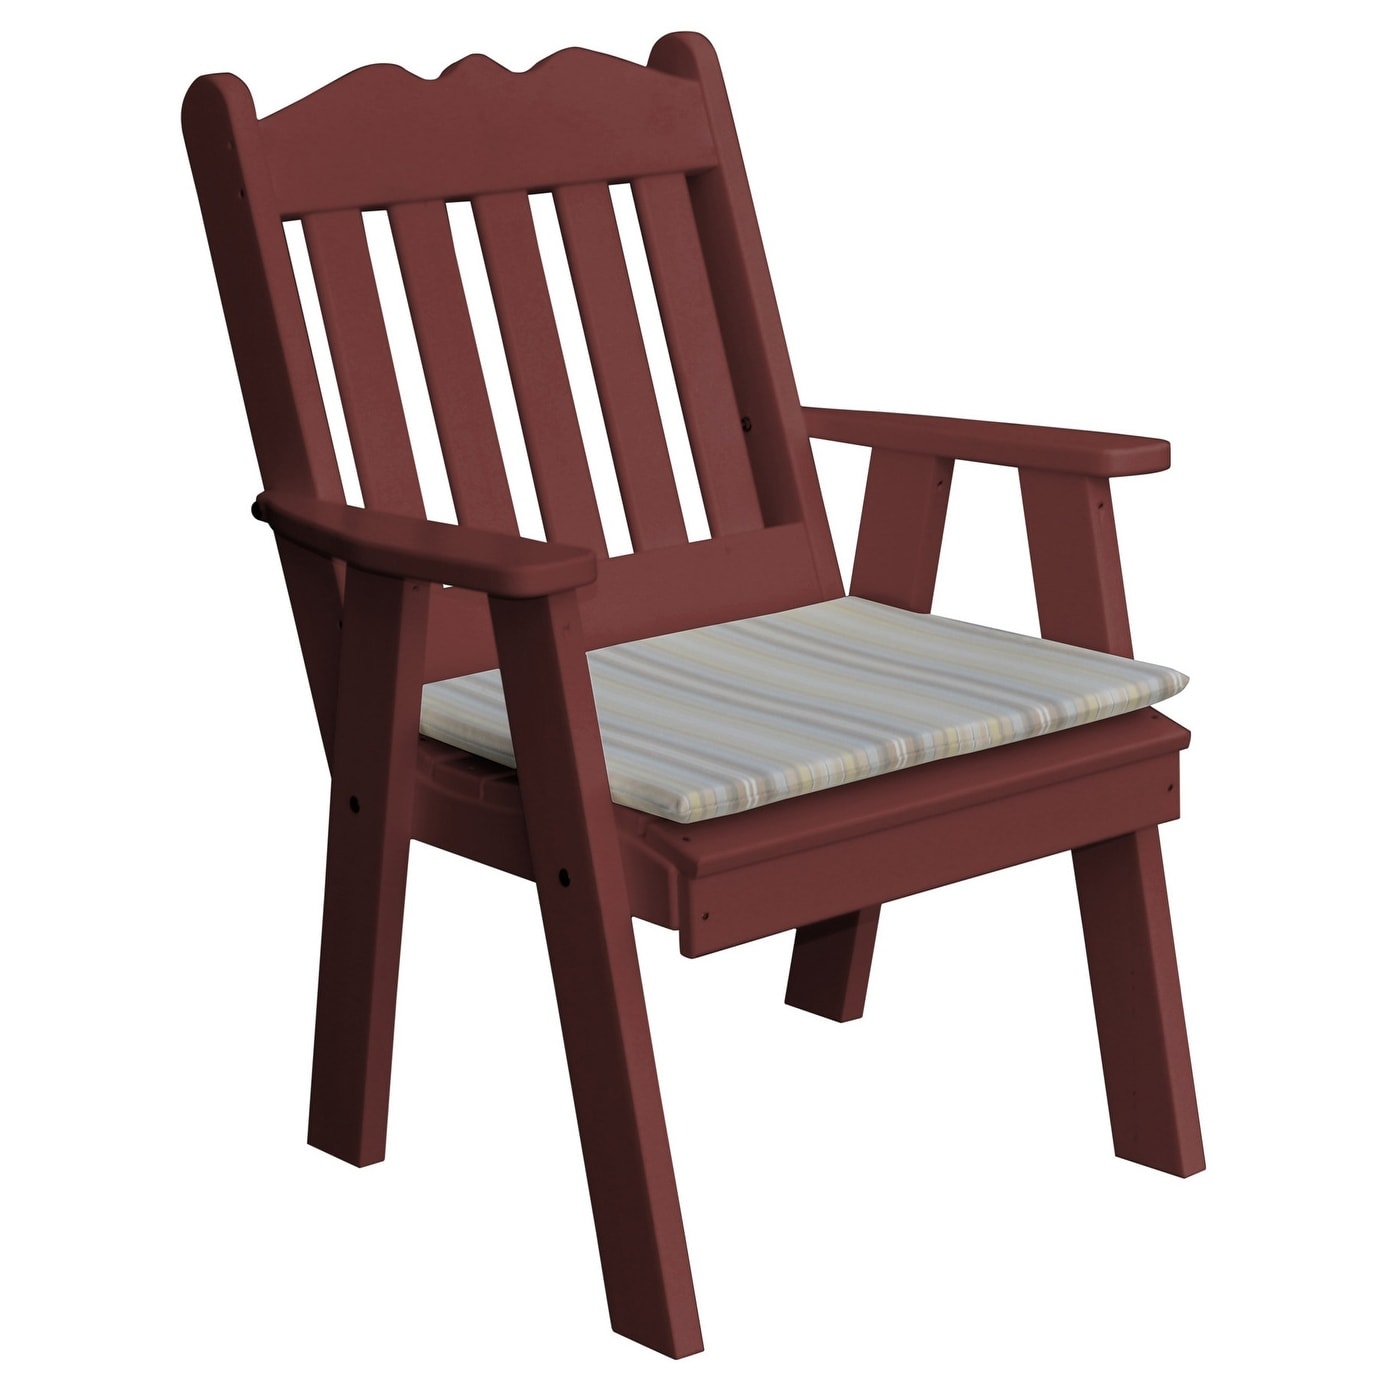 Royal English Chair In Poly Lumber